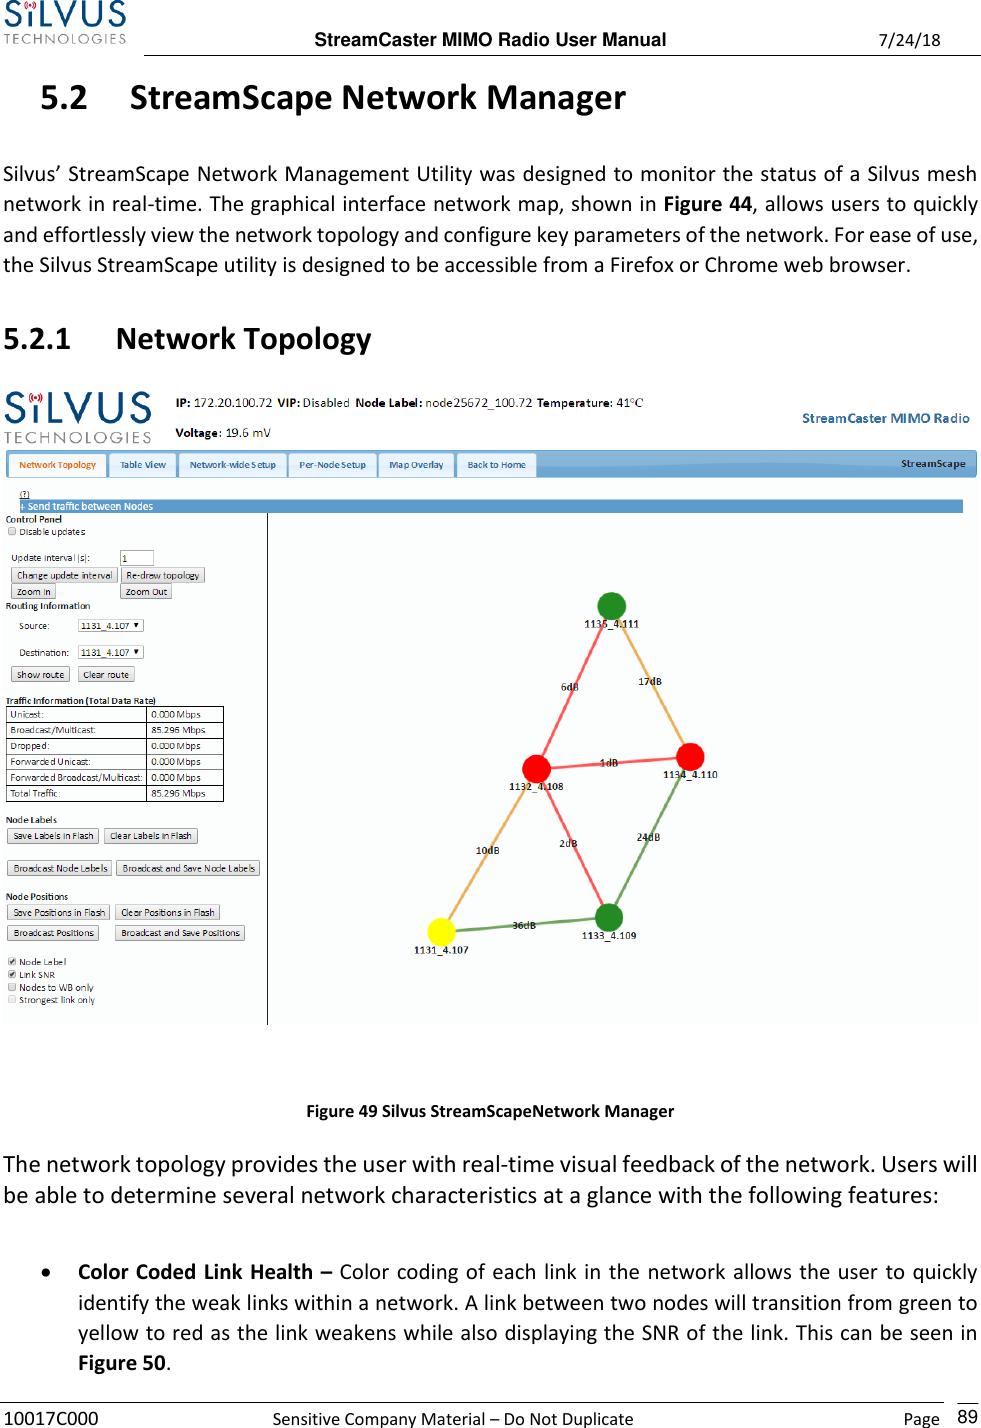  StreamCaster MIMO Radio User Manual  7/24/18 10017C000  Sensitive Company Material – Do Not Duplicate    Page    89 5.2 StreamScape Network Manager  Silvus’ StreamScape Network Management Utility was designed to monitor the status of a Silvus mesh network in real-time. The graphical interface network map, shown in Figure 44, allows users to quickly and effortlessly view the network topology and configure key parameters of the network. For ease of use, the Silvus StreamScape utility is designed to be accessible from a Firefox or Chrome web browser.  5.2.1 Network Topology   Figure 49 Silvus StreamScapeNetwork Manager The network topology provides the user with real-time visual feedback of the network. Users will be able to determine several network characteristics at a glance with the following features:   • Color Coded Link Health – Color coding of each link in the network allows the user to quickly identify the weak links within a network. A link between two nodes will transition from green to yellow to red as the link weakens while also displaying the SNR of the link. This can be seen in Figure 50.  